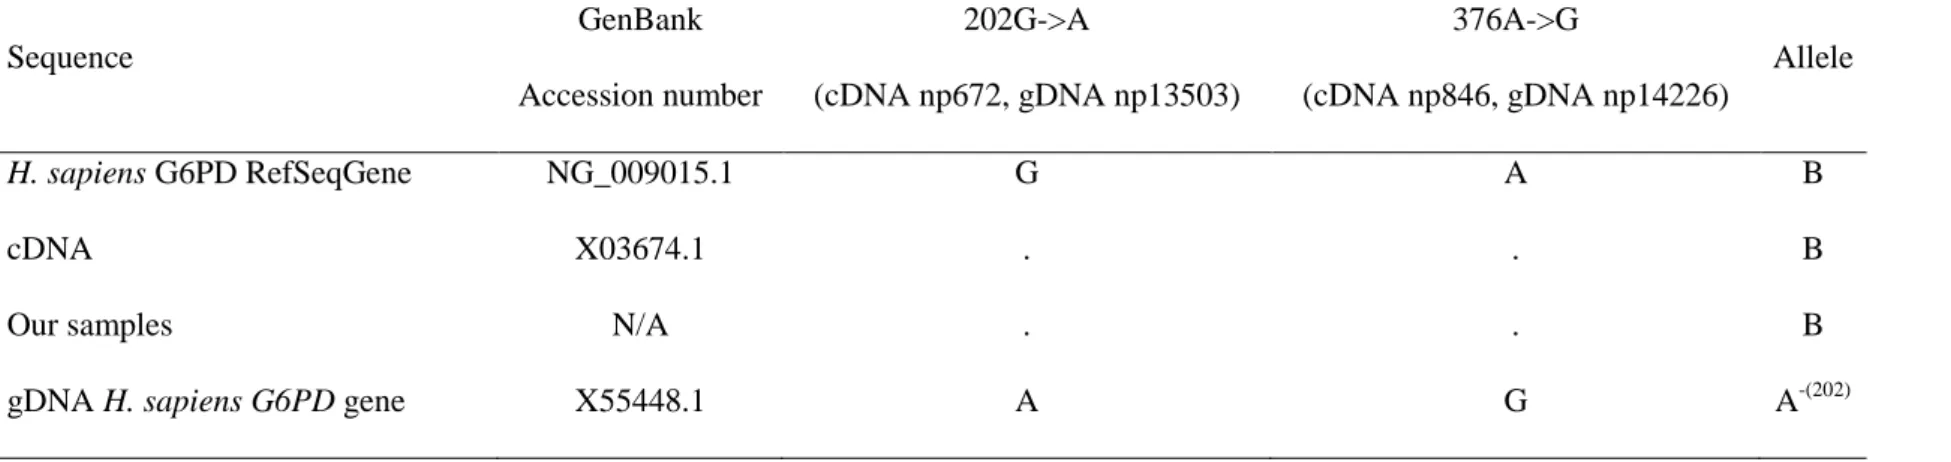 Table 1 Nucleotide variations in a set of G6PD reference sequences and samples. Coding (cDNA) and genomic (gDNA) coordinates correspond to the  locations on X03674.1 and X55448.1 respectively